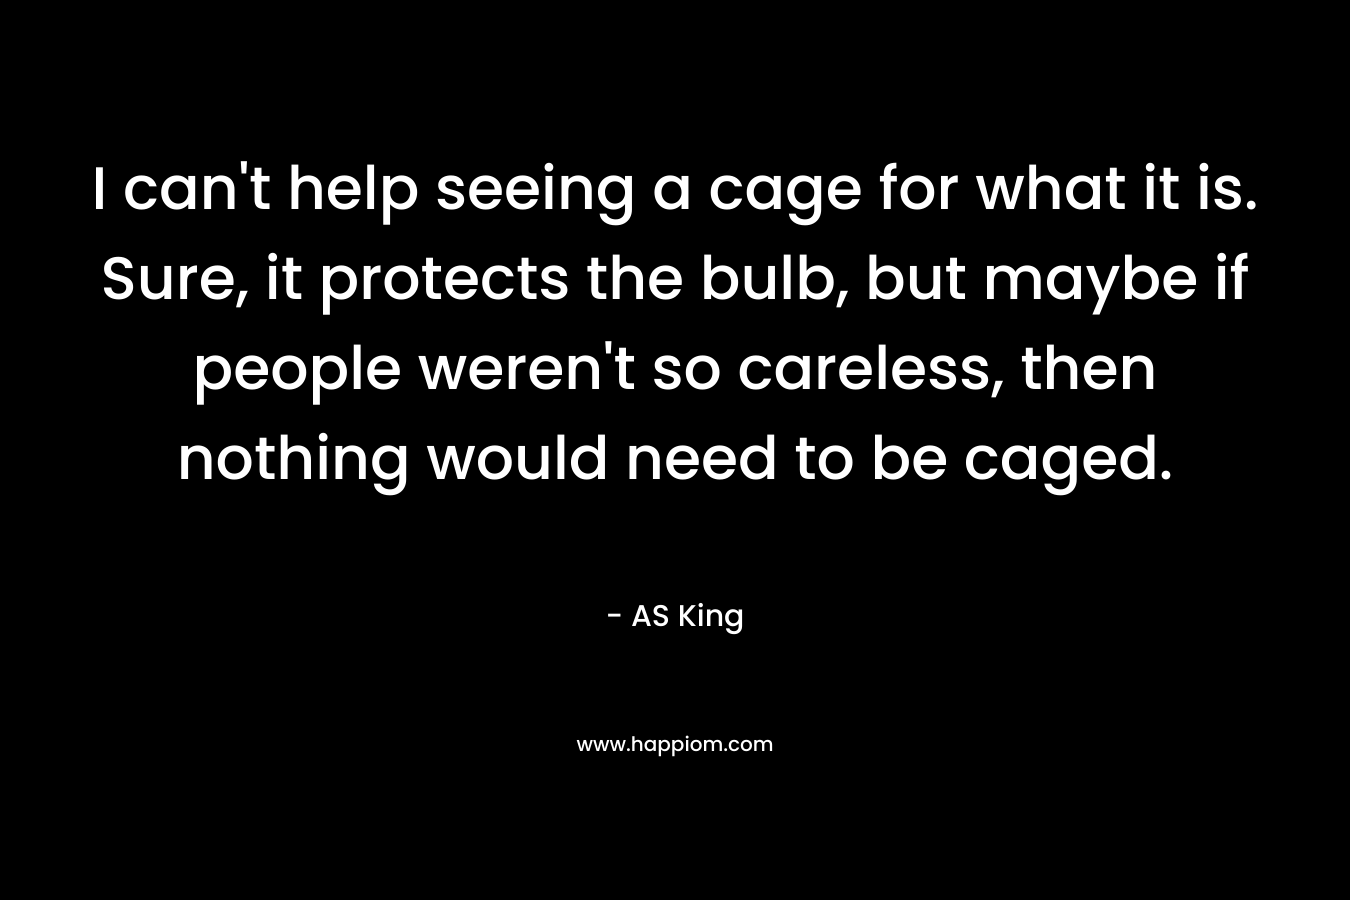 I can't help seeing a cage for what it is. Sure, it protects the bulb, but maybe if people weren't so careless, then nothing would need to be caged.